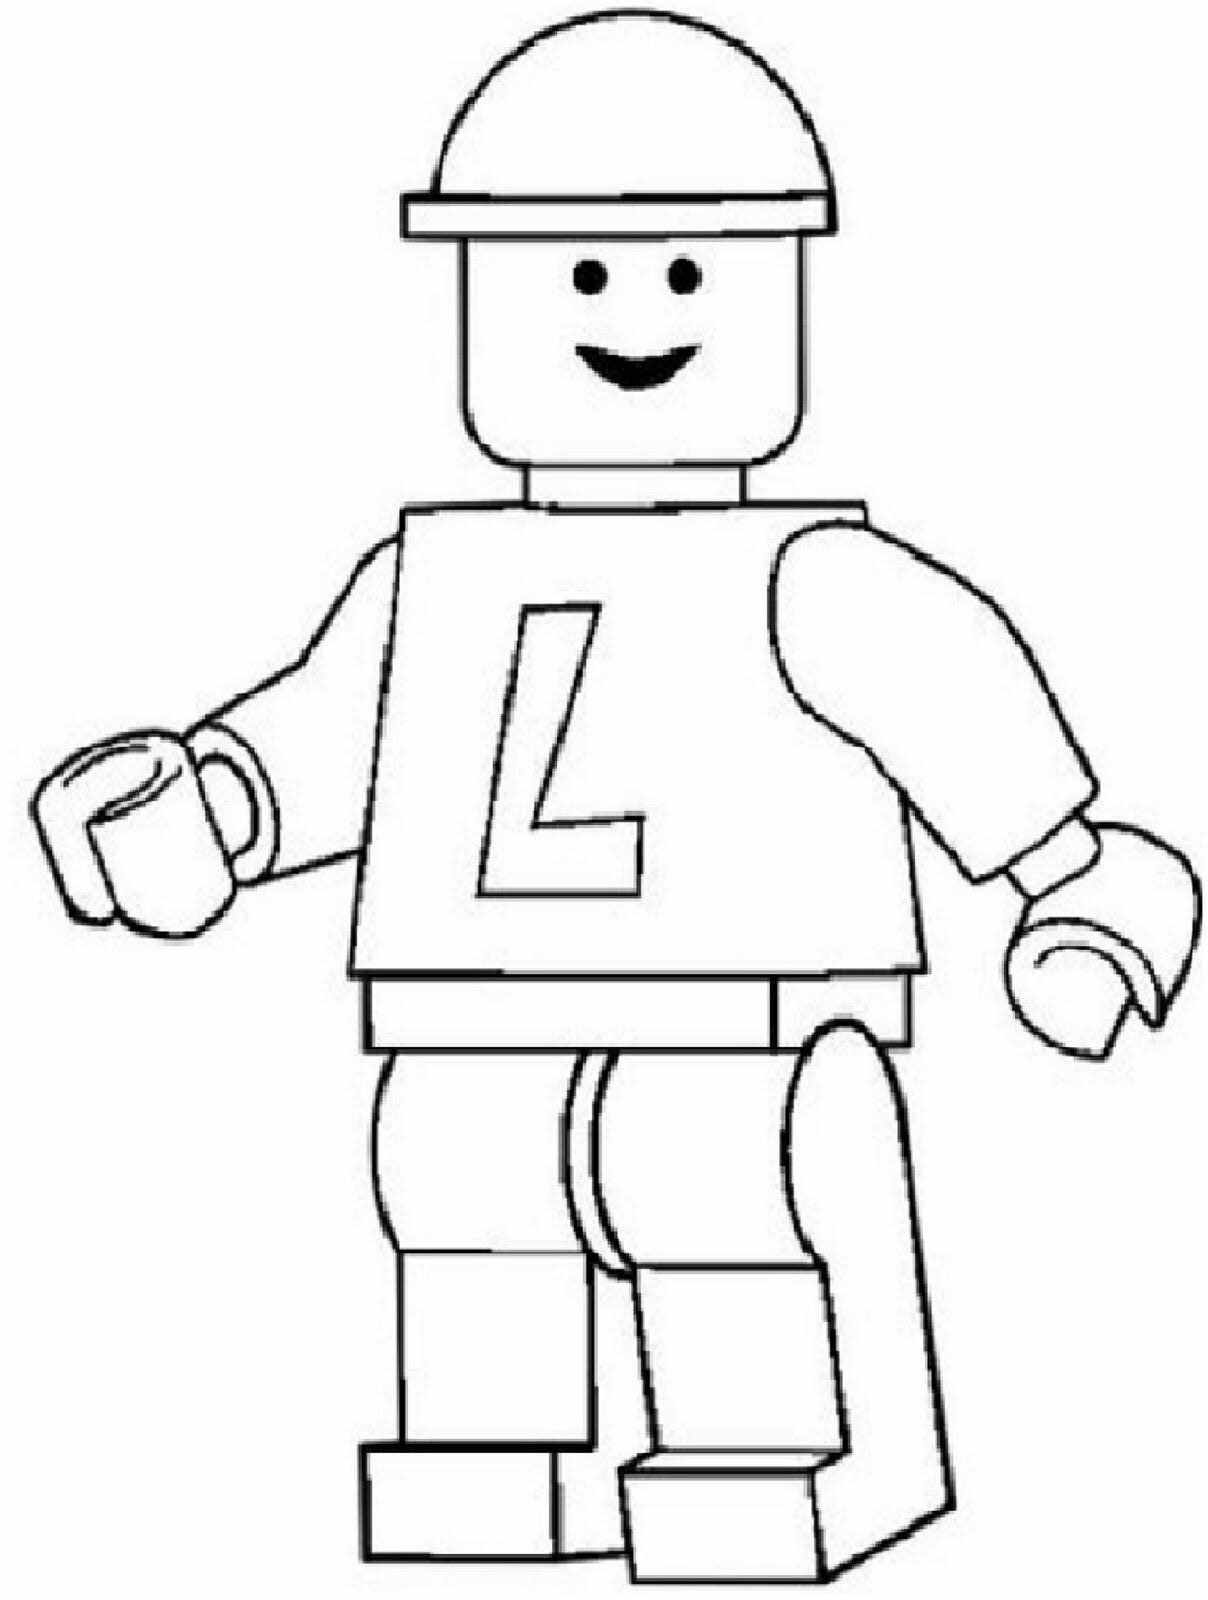 Lego Man Coloring Pages - High Quality Coloring Pages